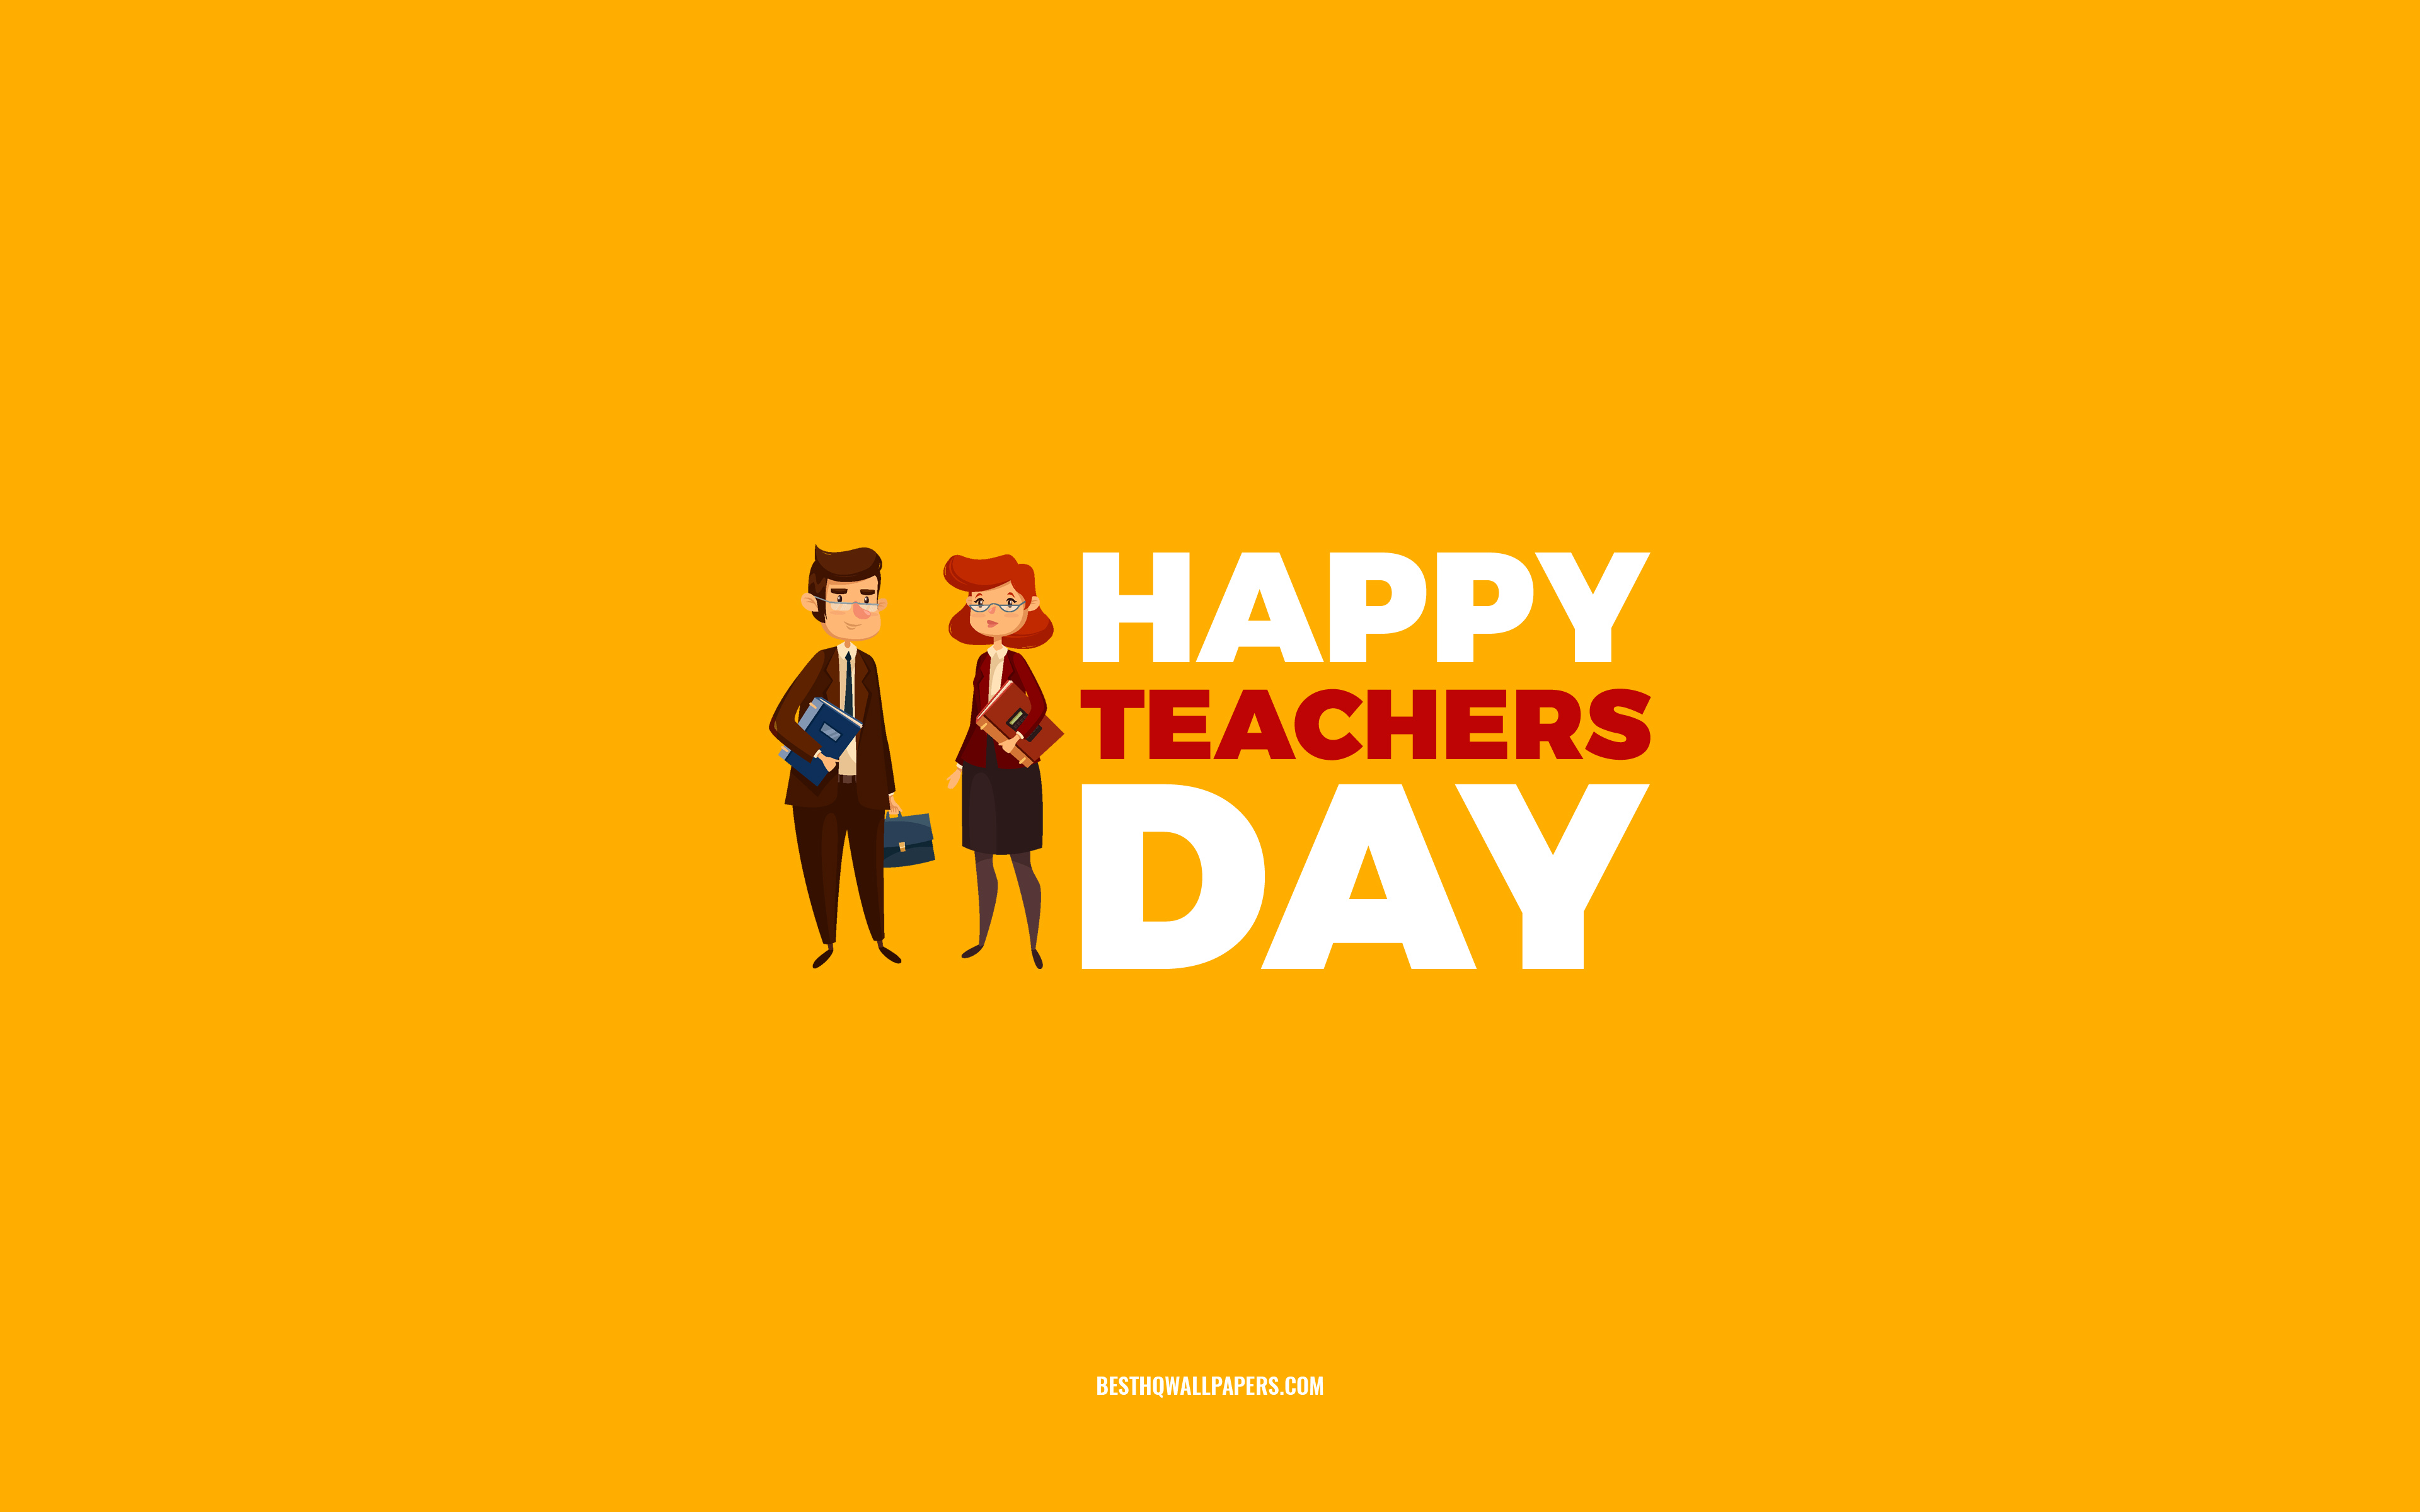 Download wallpapers Happy Teachers Day, 4k, orange background, Teachers  profession, greeting card for Teachers, Teachers Day, congratulations,  Teachers, Day of Teachers for desktop with resolution 3840x2400. High  Quality HD pictures wallpapers